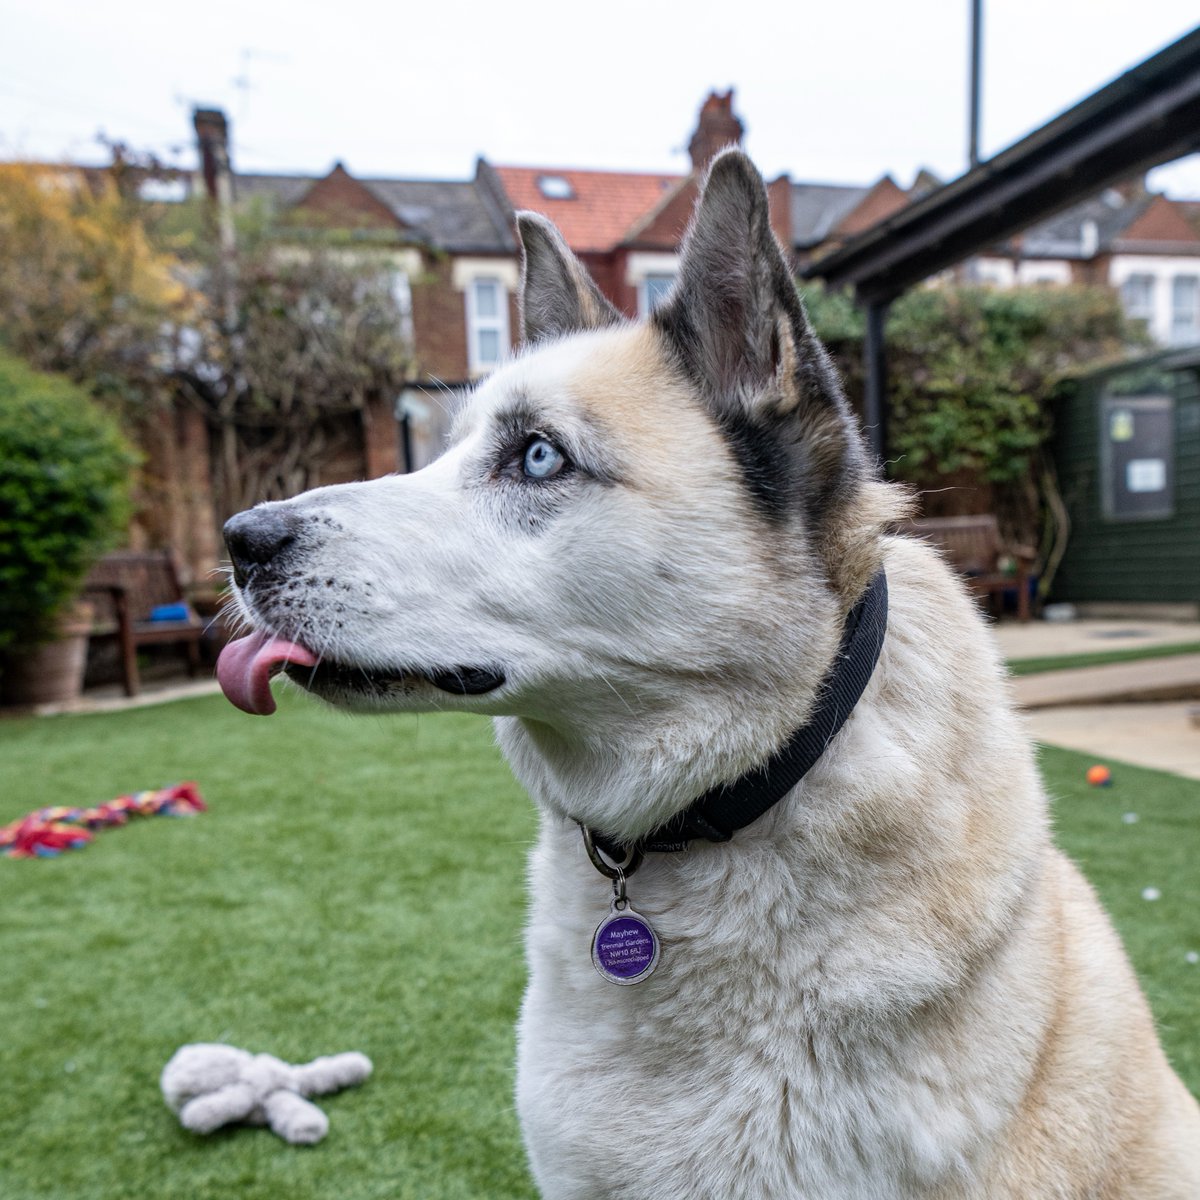 Molly is here with her #TongueOutTuesday! Molly is described as having 'a sweet and easy-going temperament and loves meeting new human friends, adults and children alike.' She's a wonderful companion who will make a loving and treasured family member. 💜 themayhew.org/dogs/molly-2/.